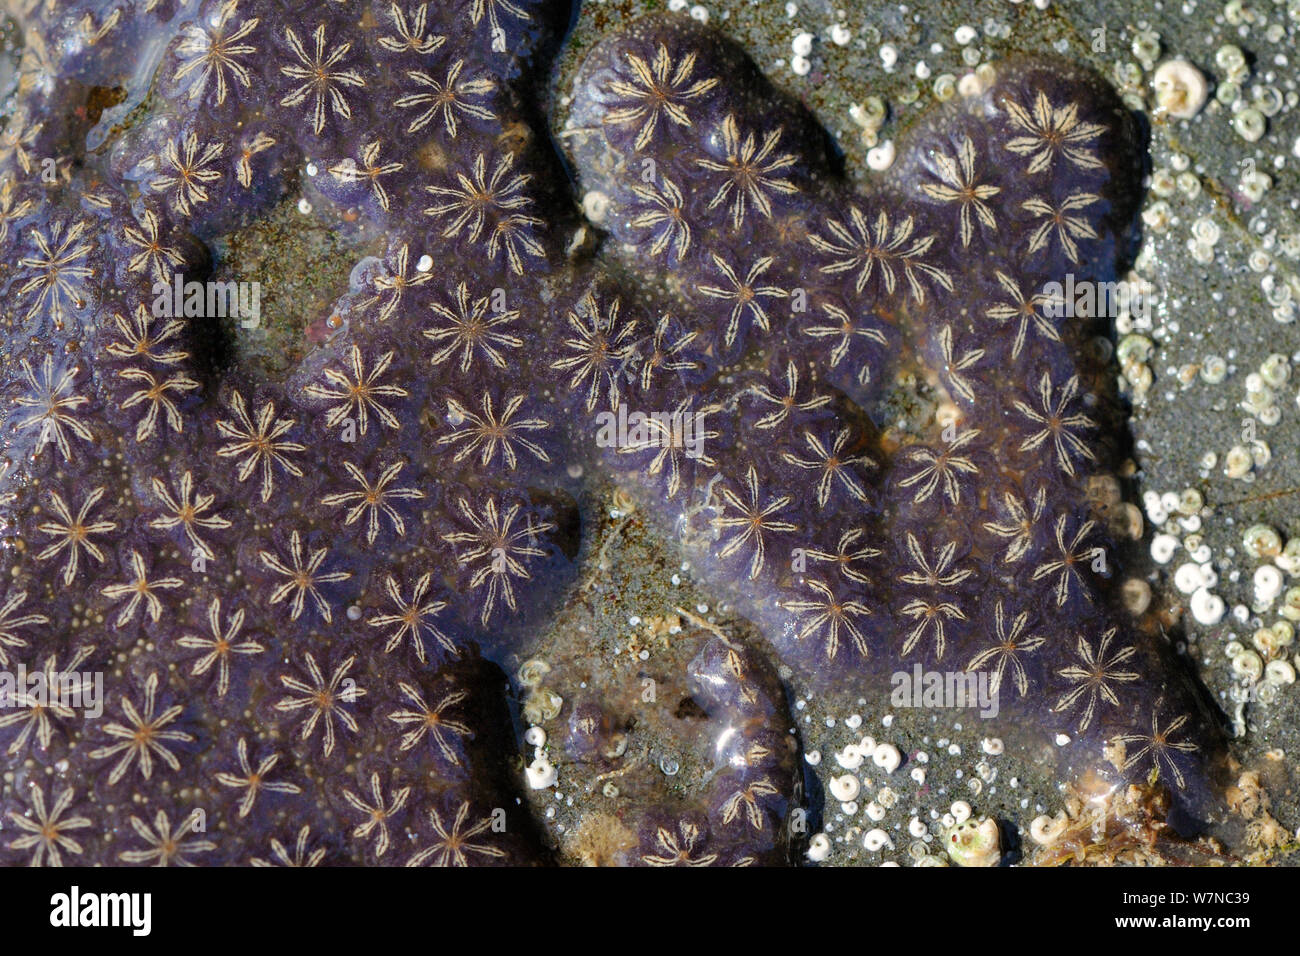 Star ascidian colony (Botryllus schlosseri) growing on rock exposed on a low spring tide, near Falmouth, Cornwall, UK, August. Stock Photo